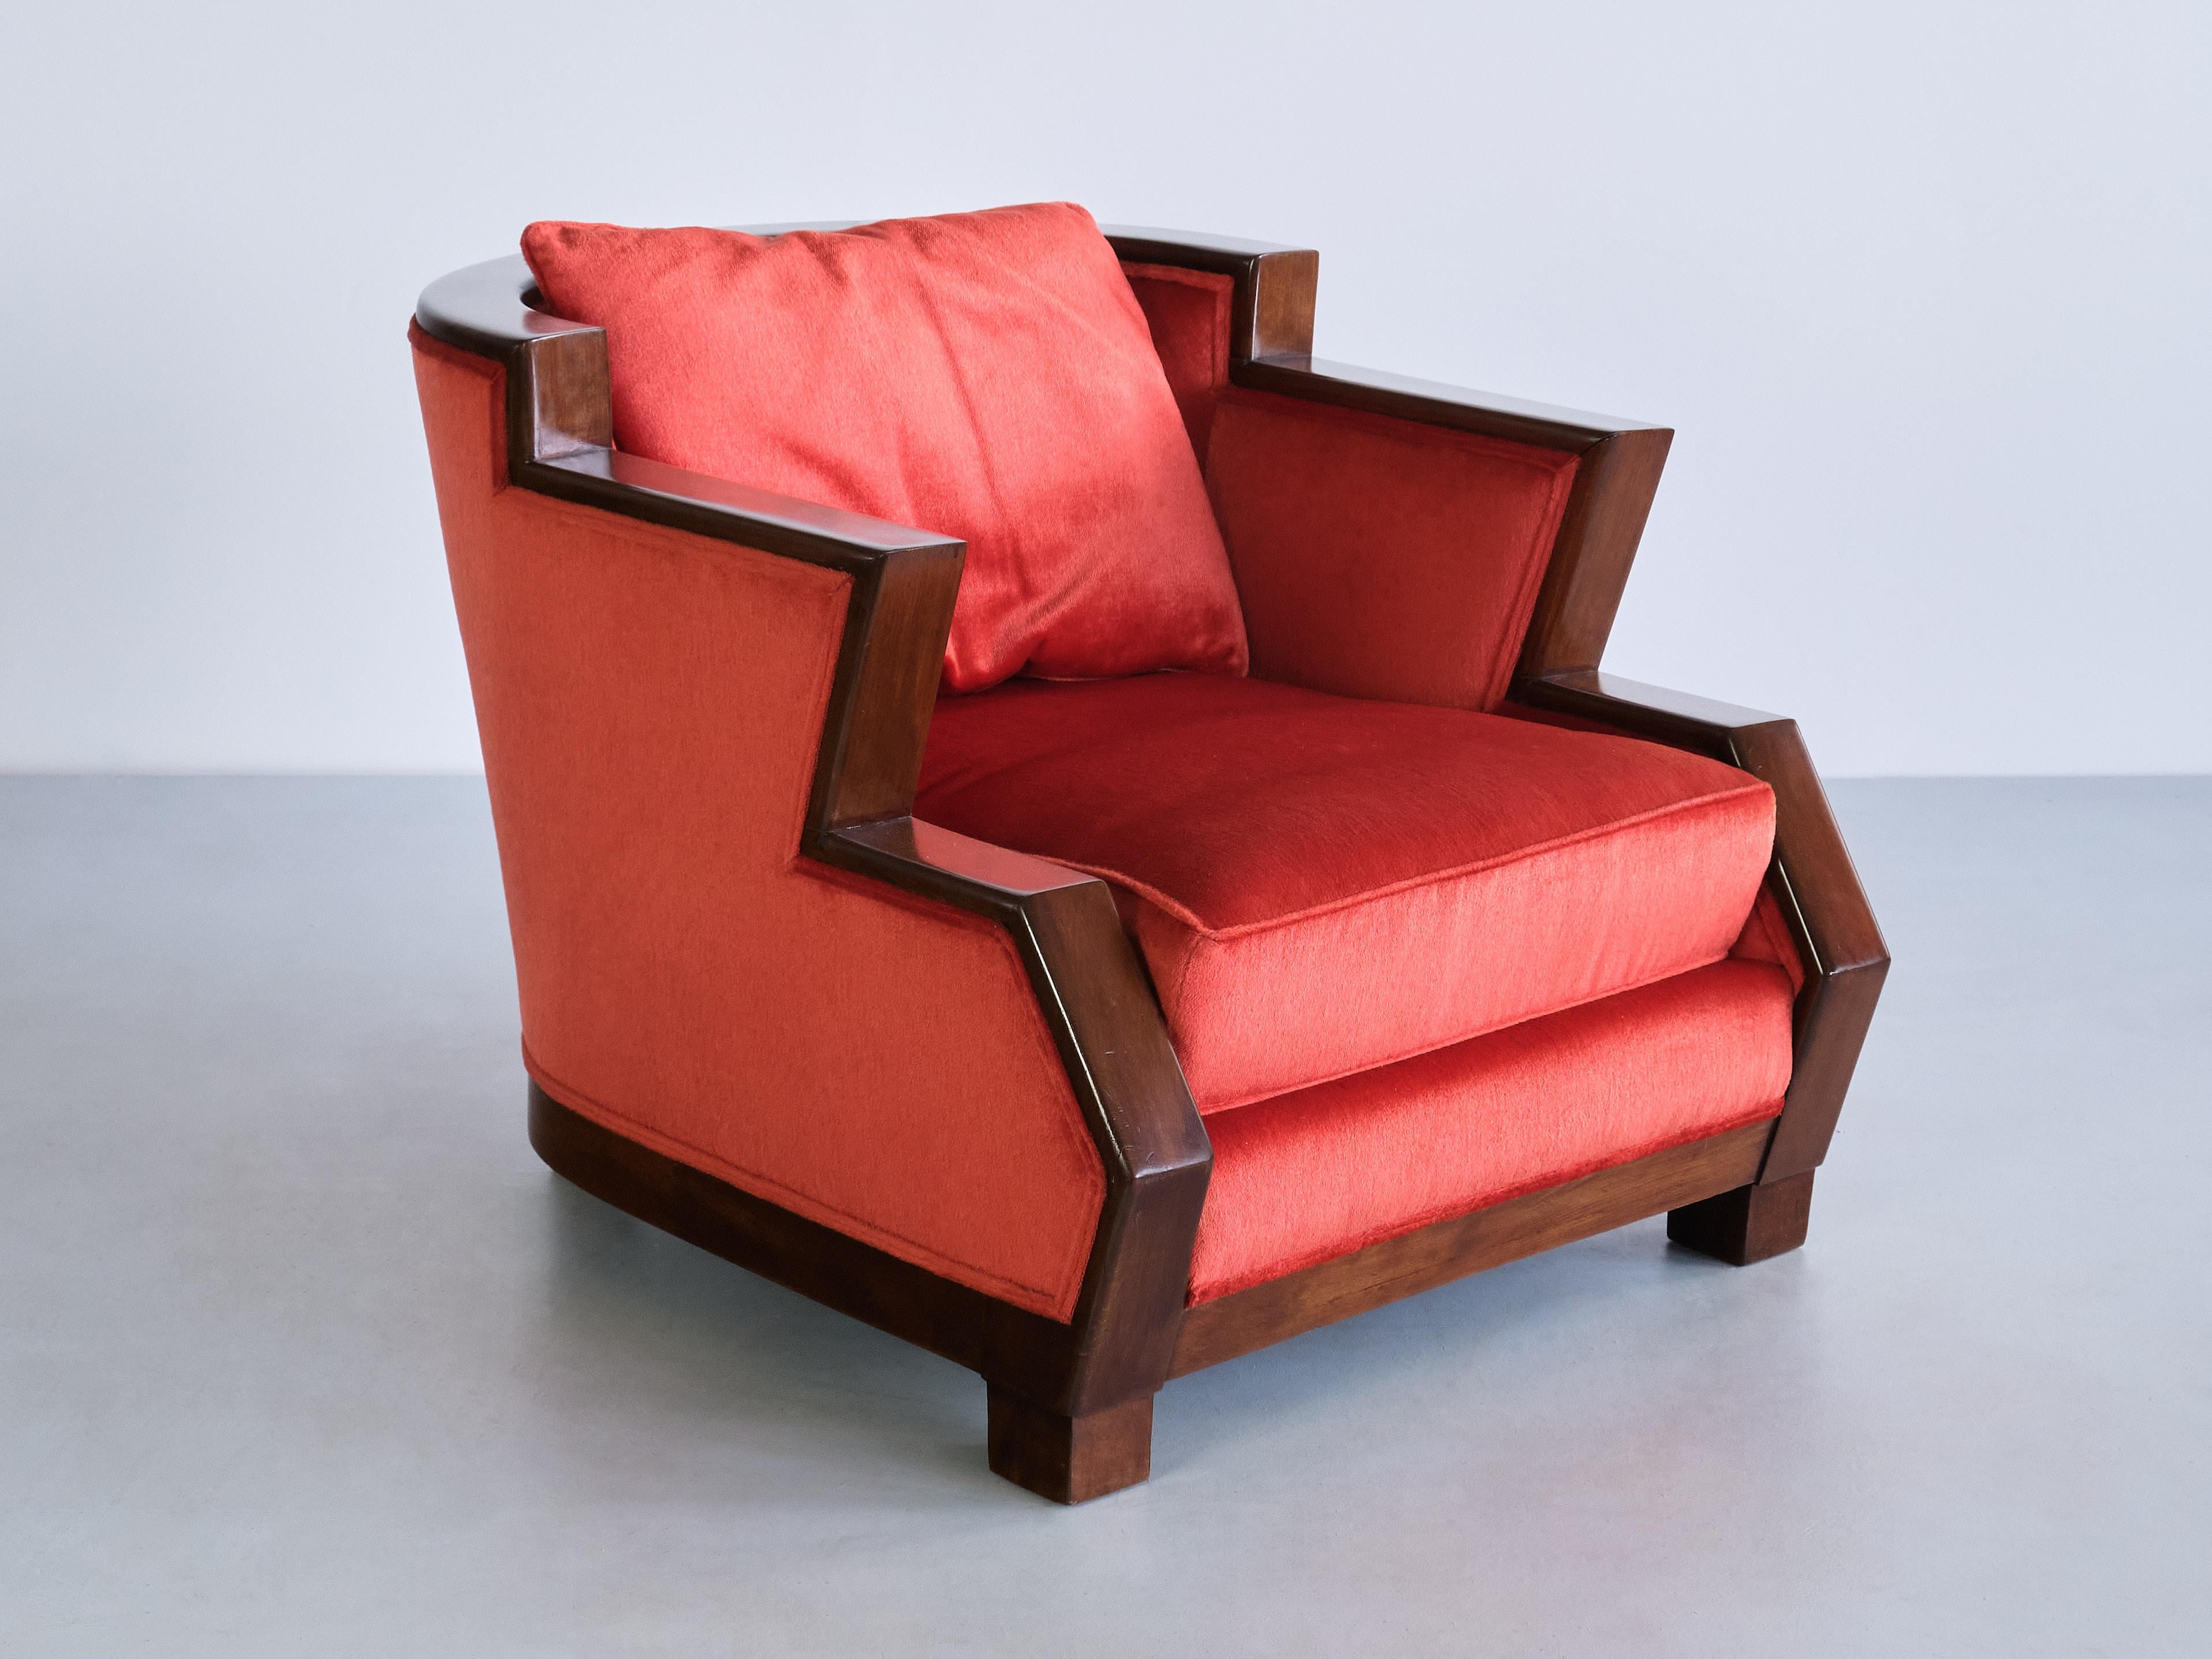 Cubist Art Deco Armchair in Vermilion Mohair Velvet and Maple, Belgium, 1920s In Good Condition For Sale In The Hague, NL